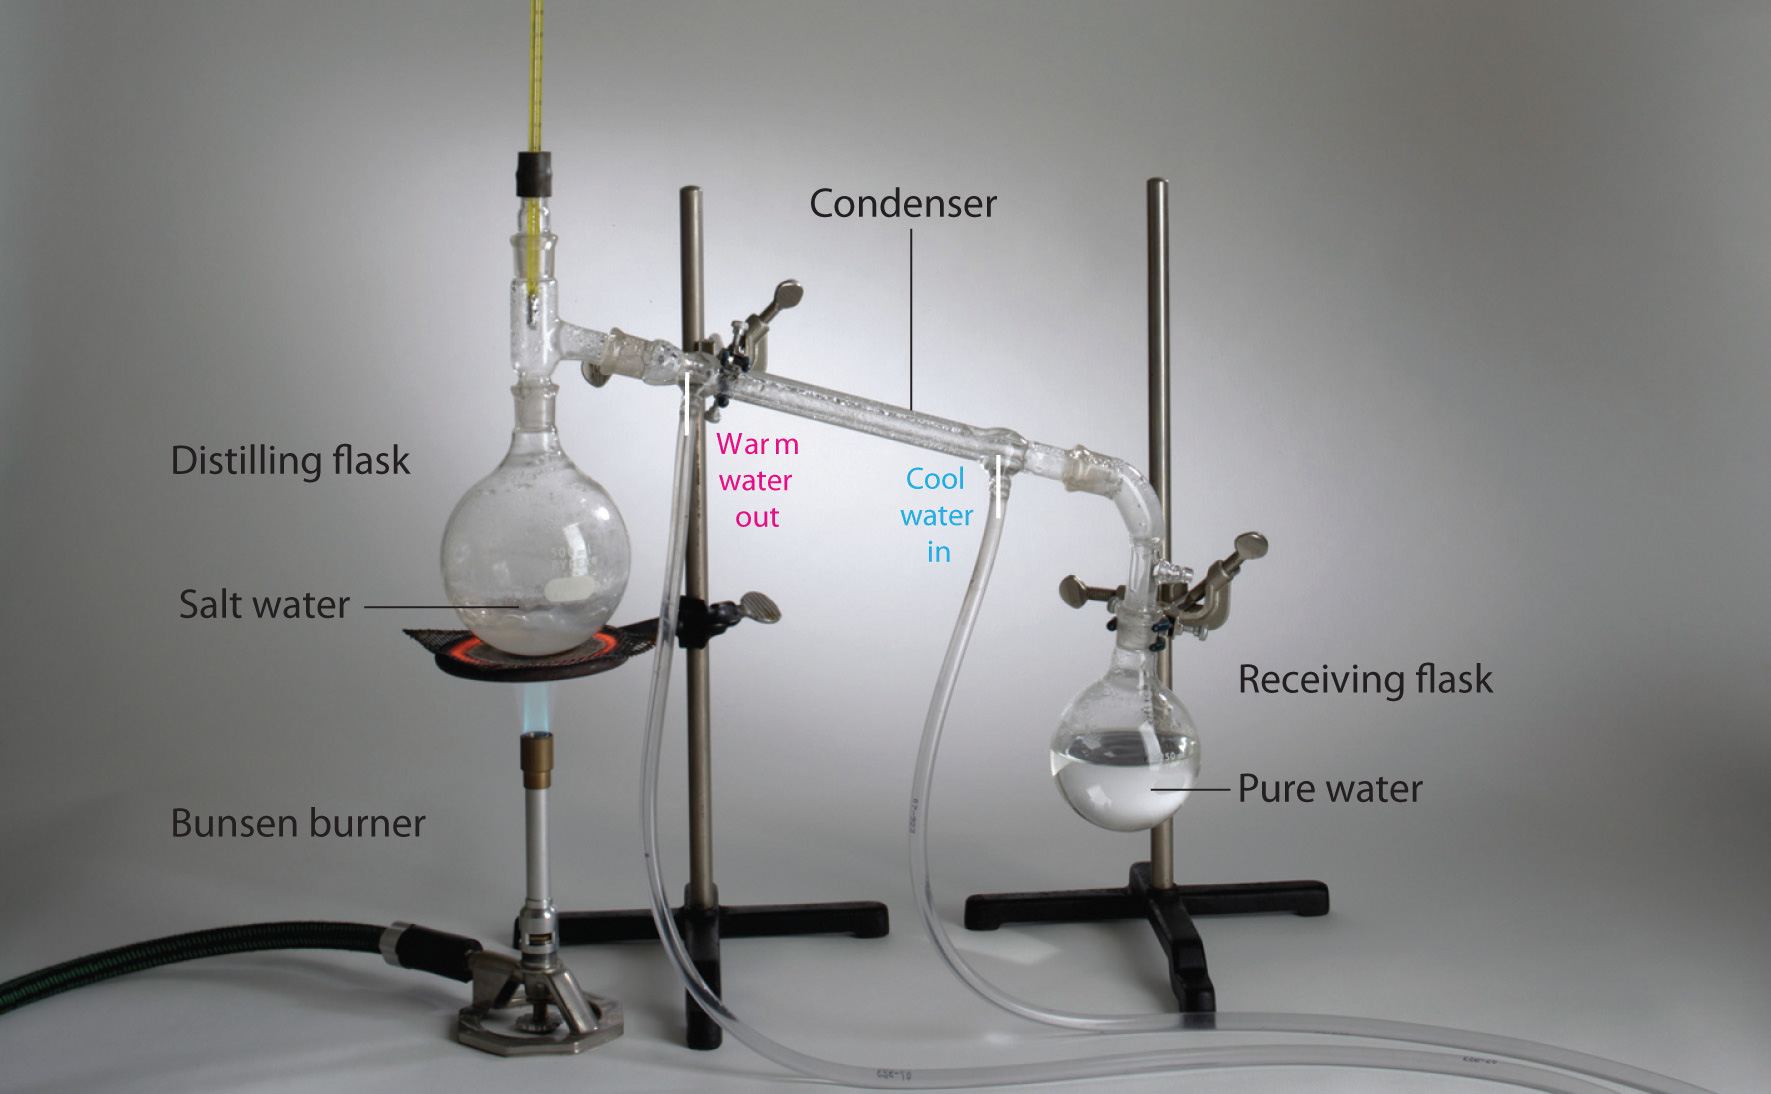 Distillation setup with distilling flask on the left being heated with a bunsen burner. A condenser connects the neck of the distilling flask to the flask containing pure water. The two flasks are being held up by clamps.